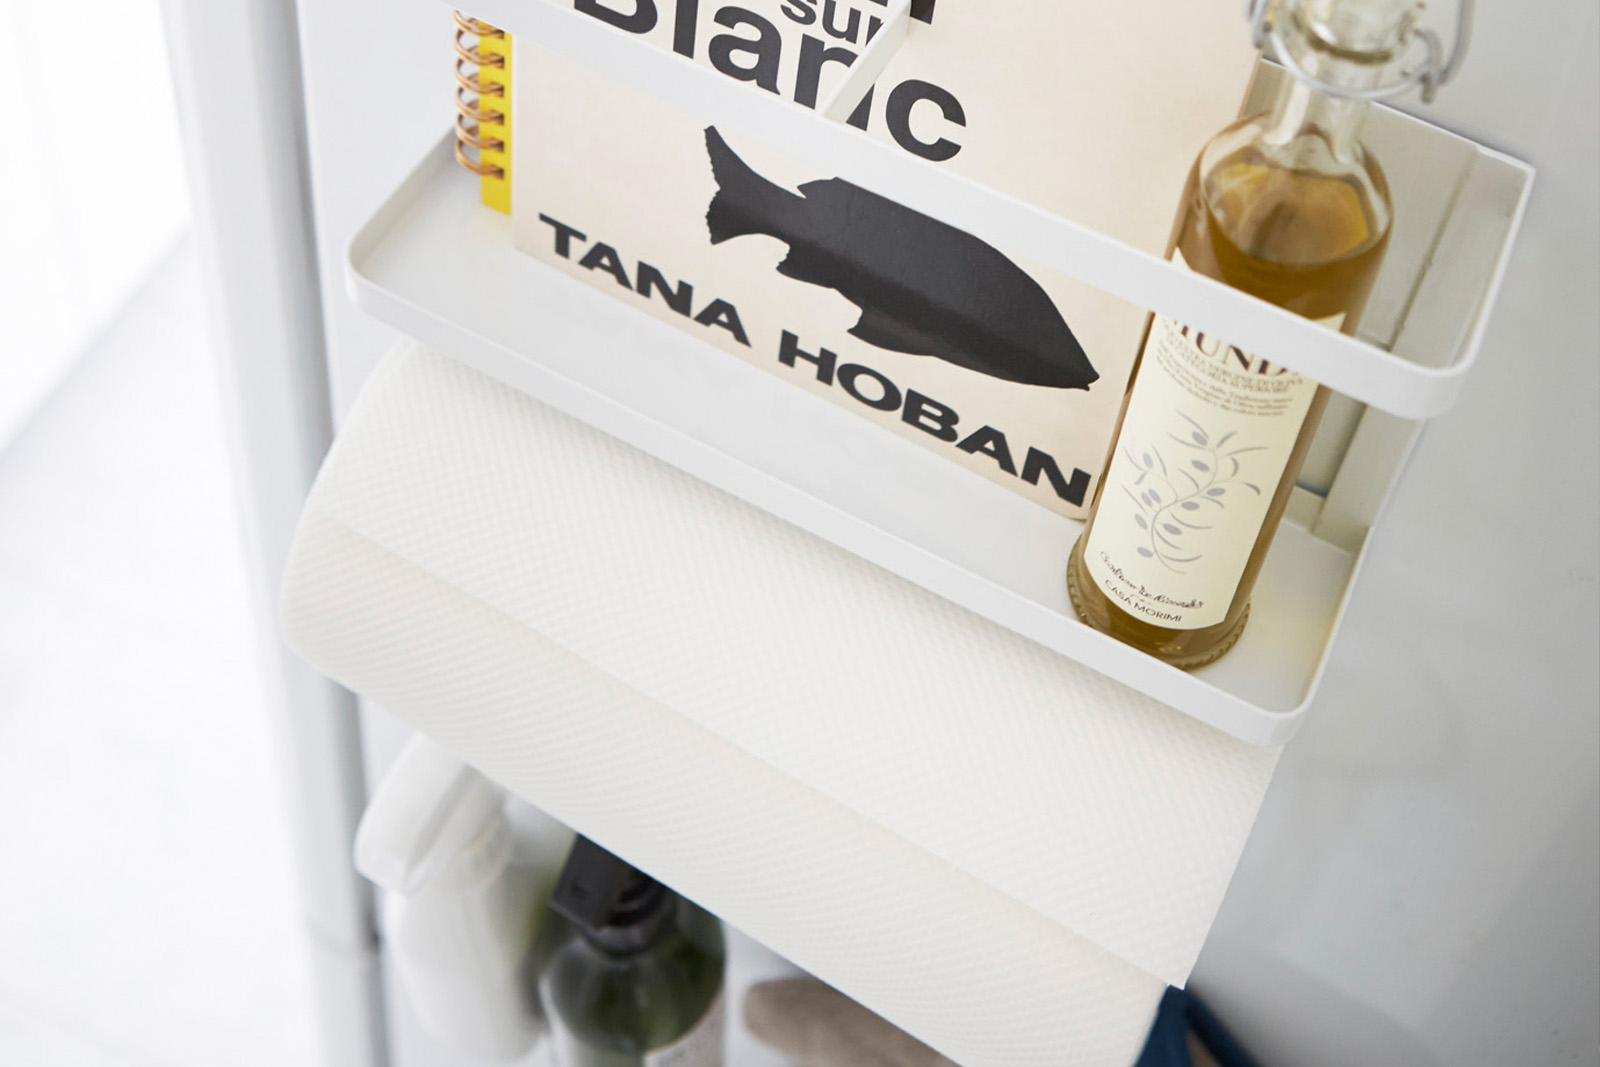 Aerial view of white Magnetic Organizer holding paper towels, book, and oil bottle by Yamazaki Home.